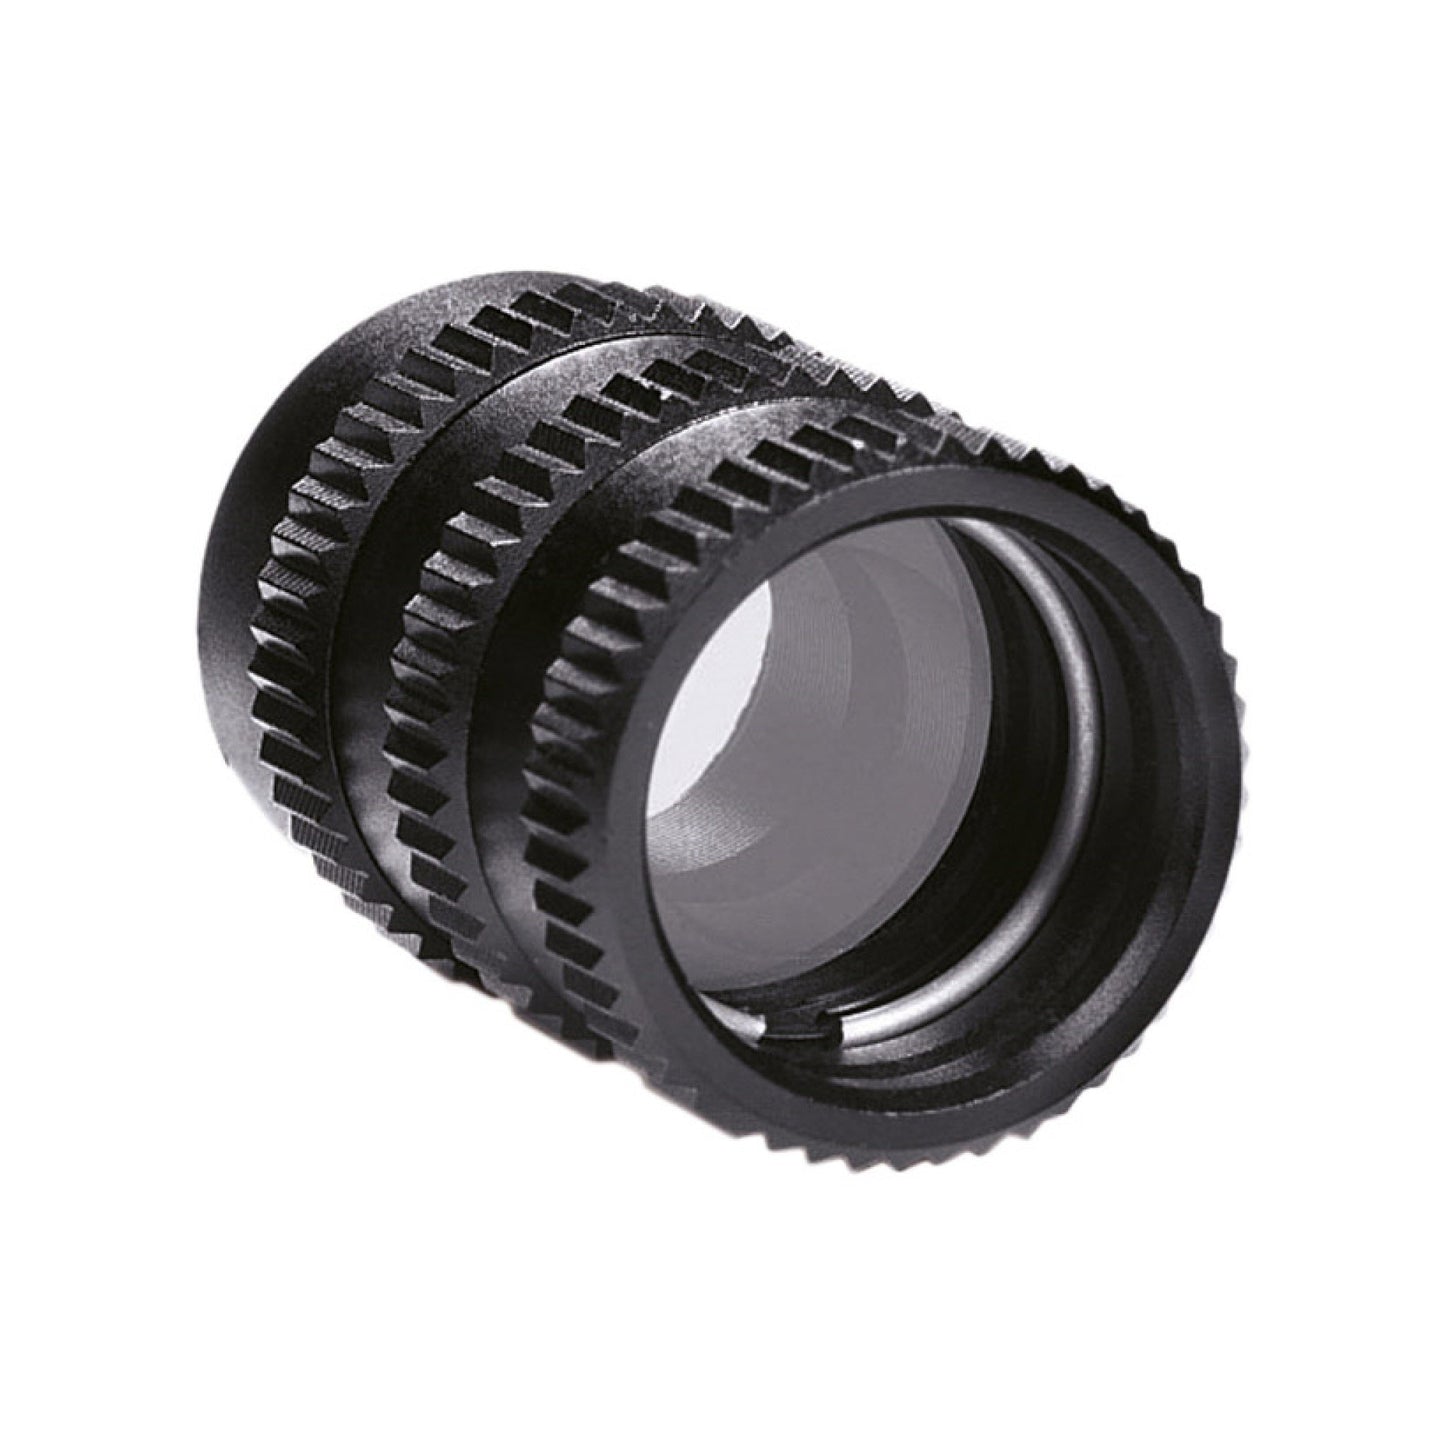 Gehmann 518-FPO CLEARVIEW Twin Polariser for 518 & 540